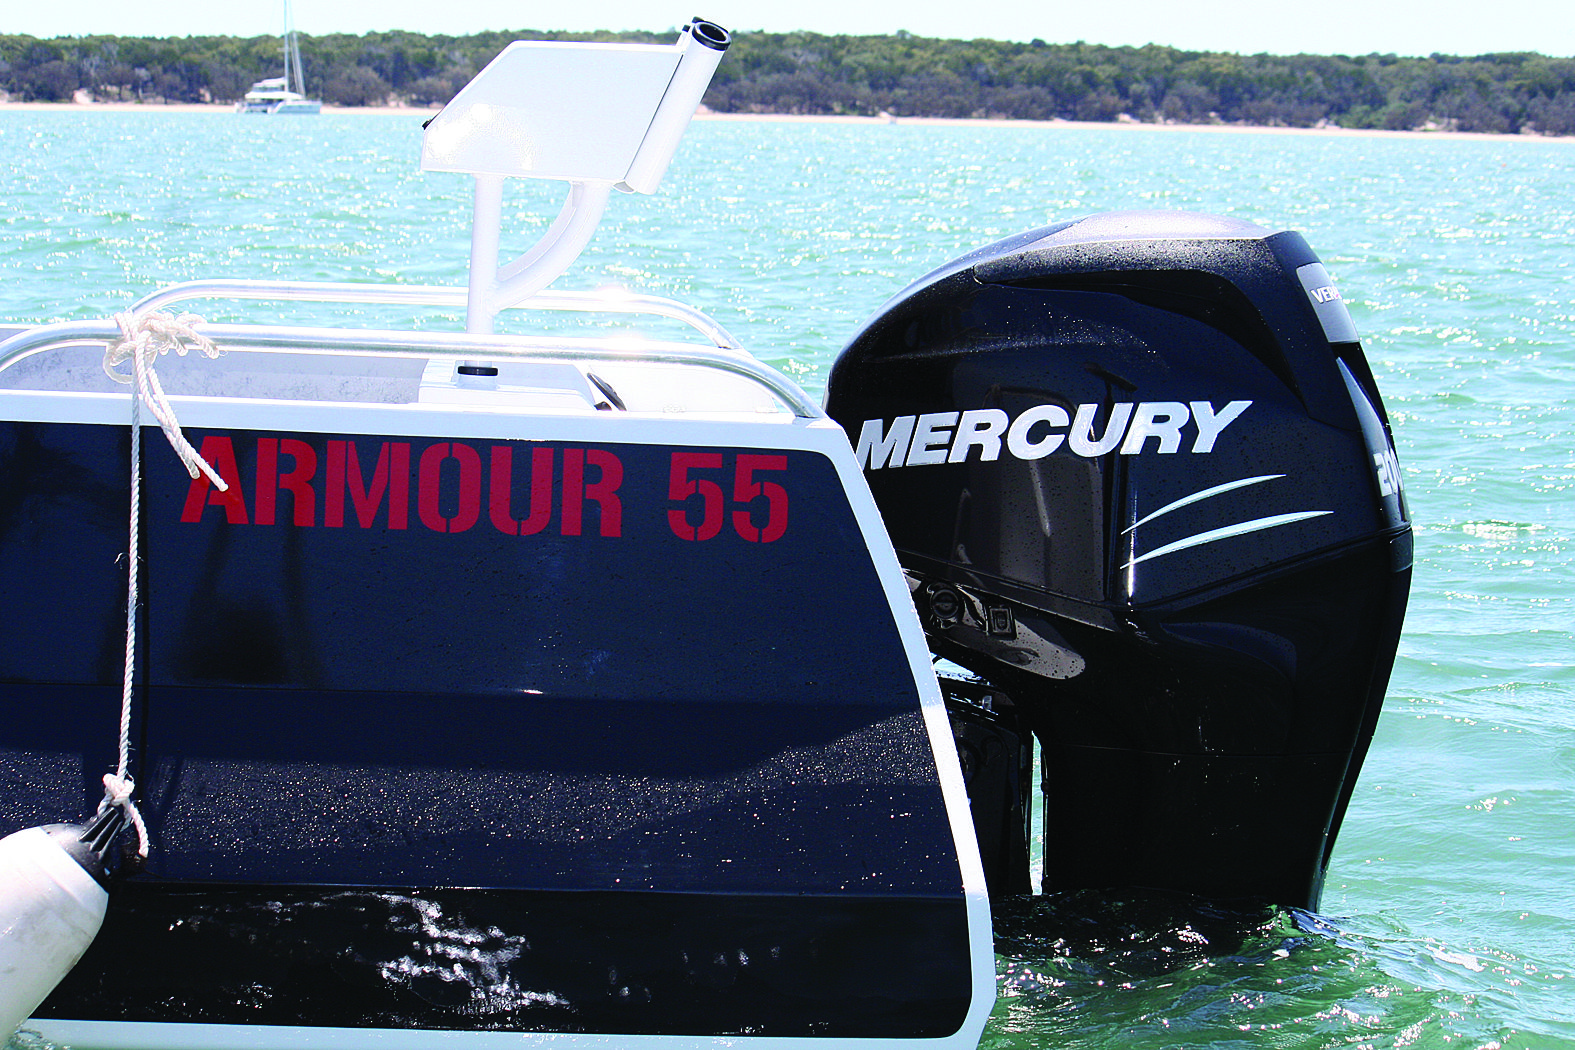 Mercury’s 200hp Verado four-stroke proved a good match for the big plate alloy rig.